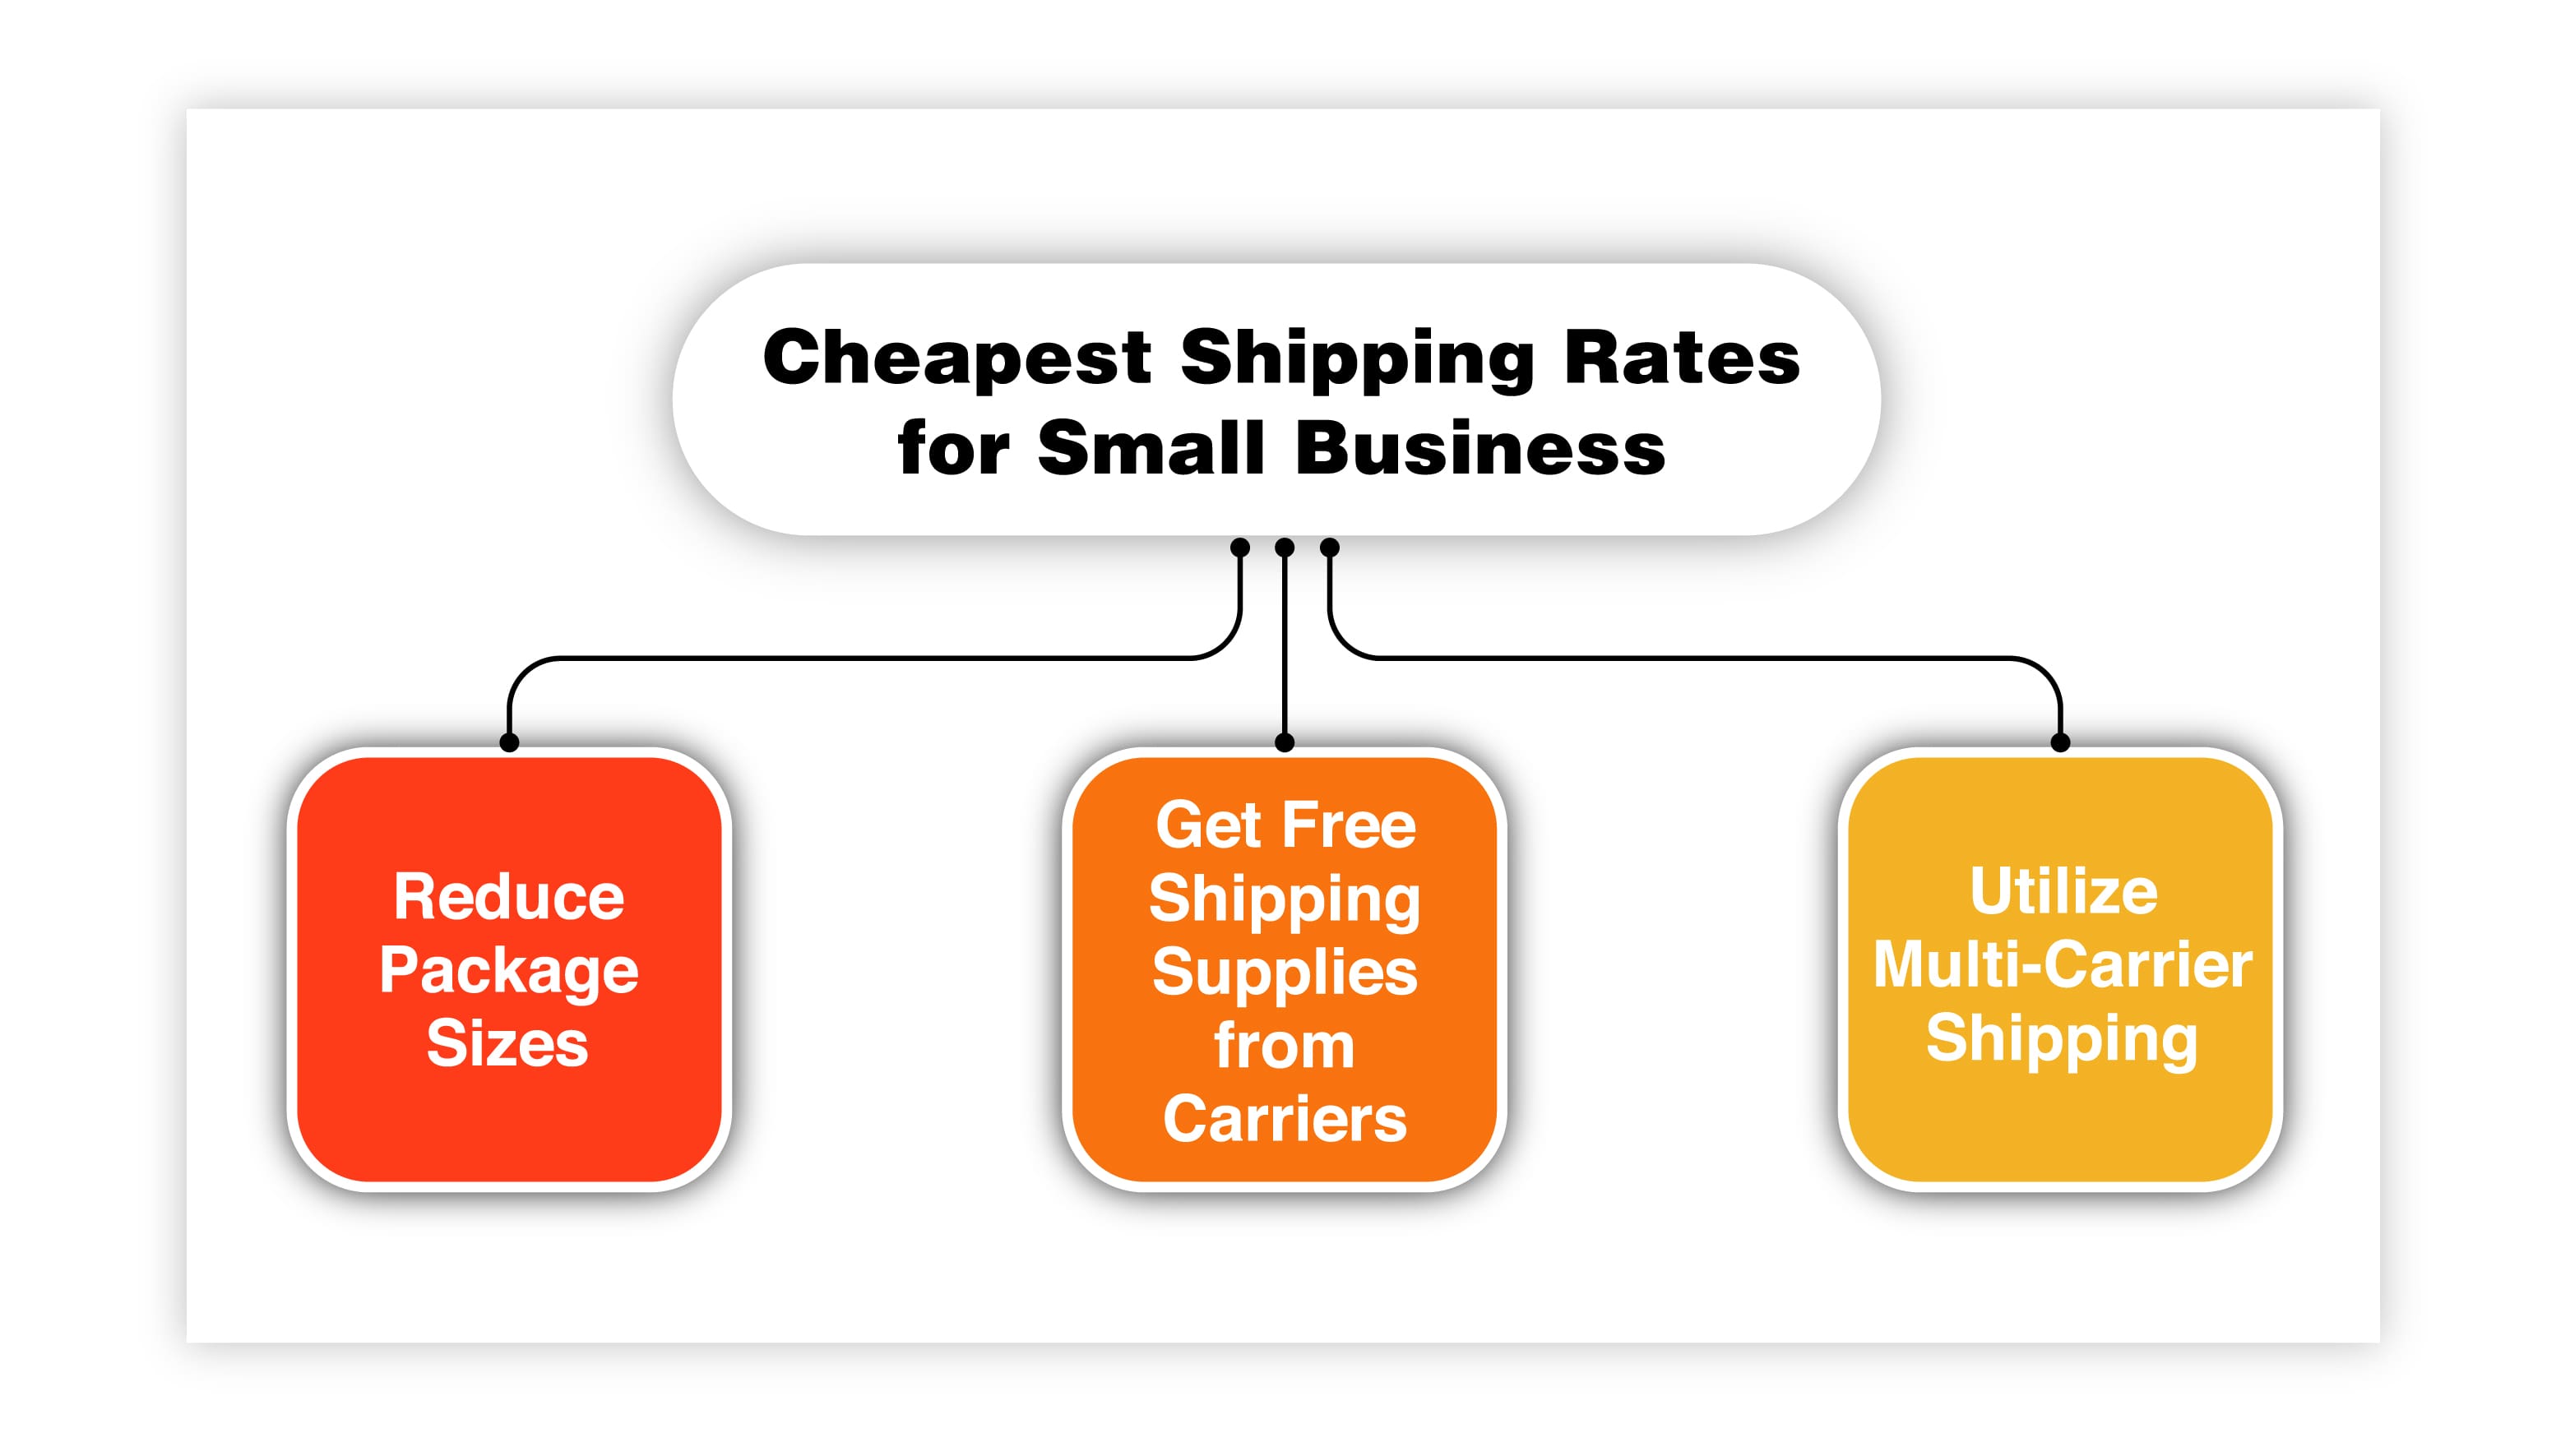 Cheapest Shipping Rates for Small Business